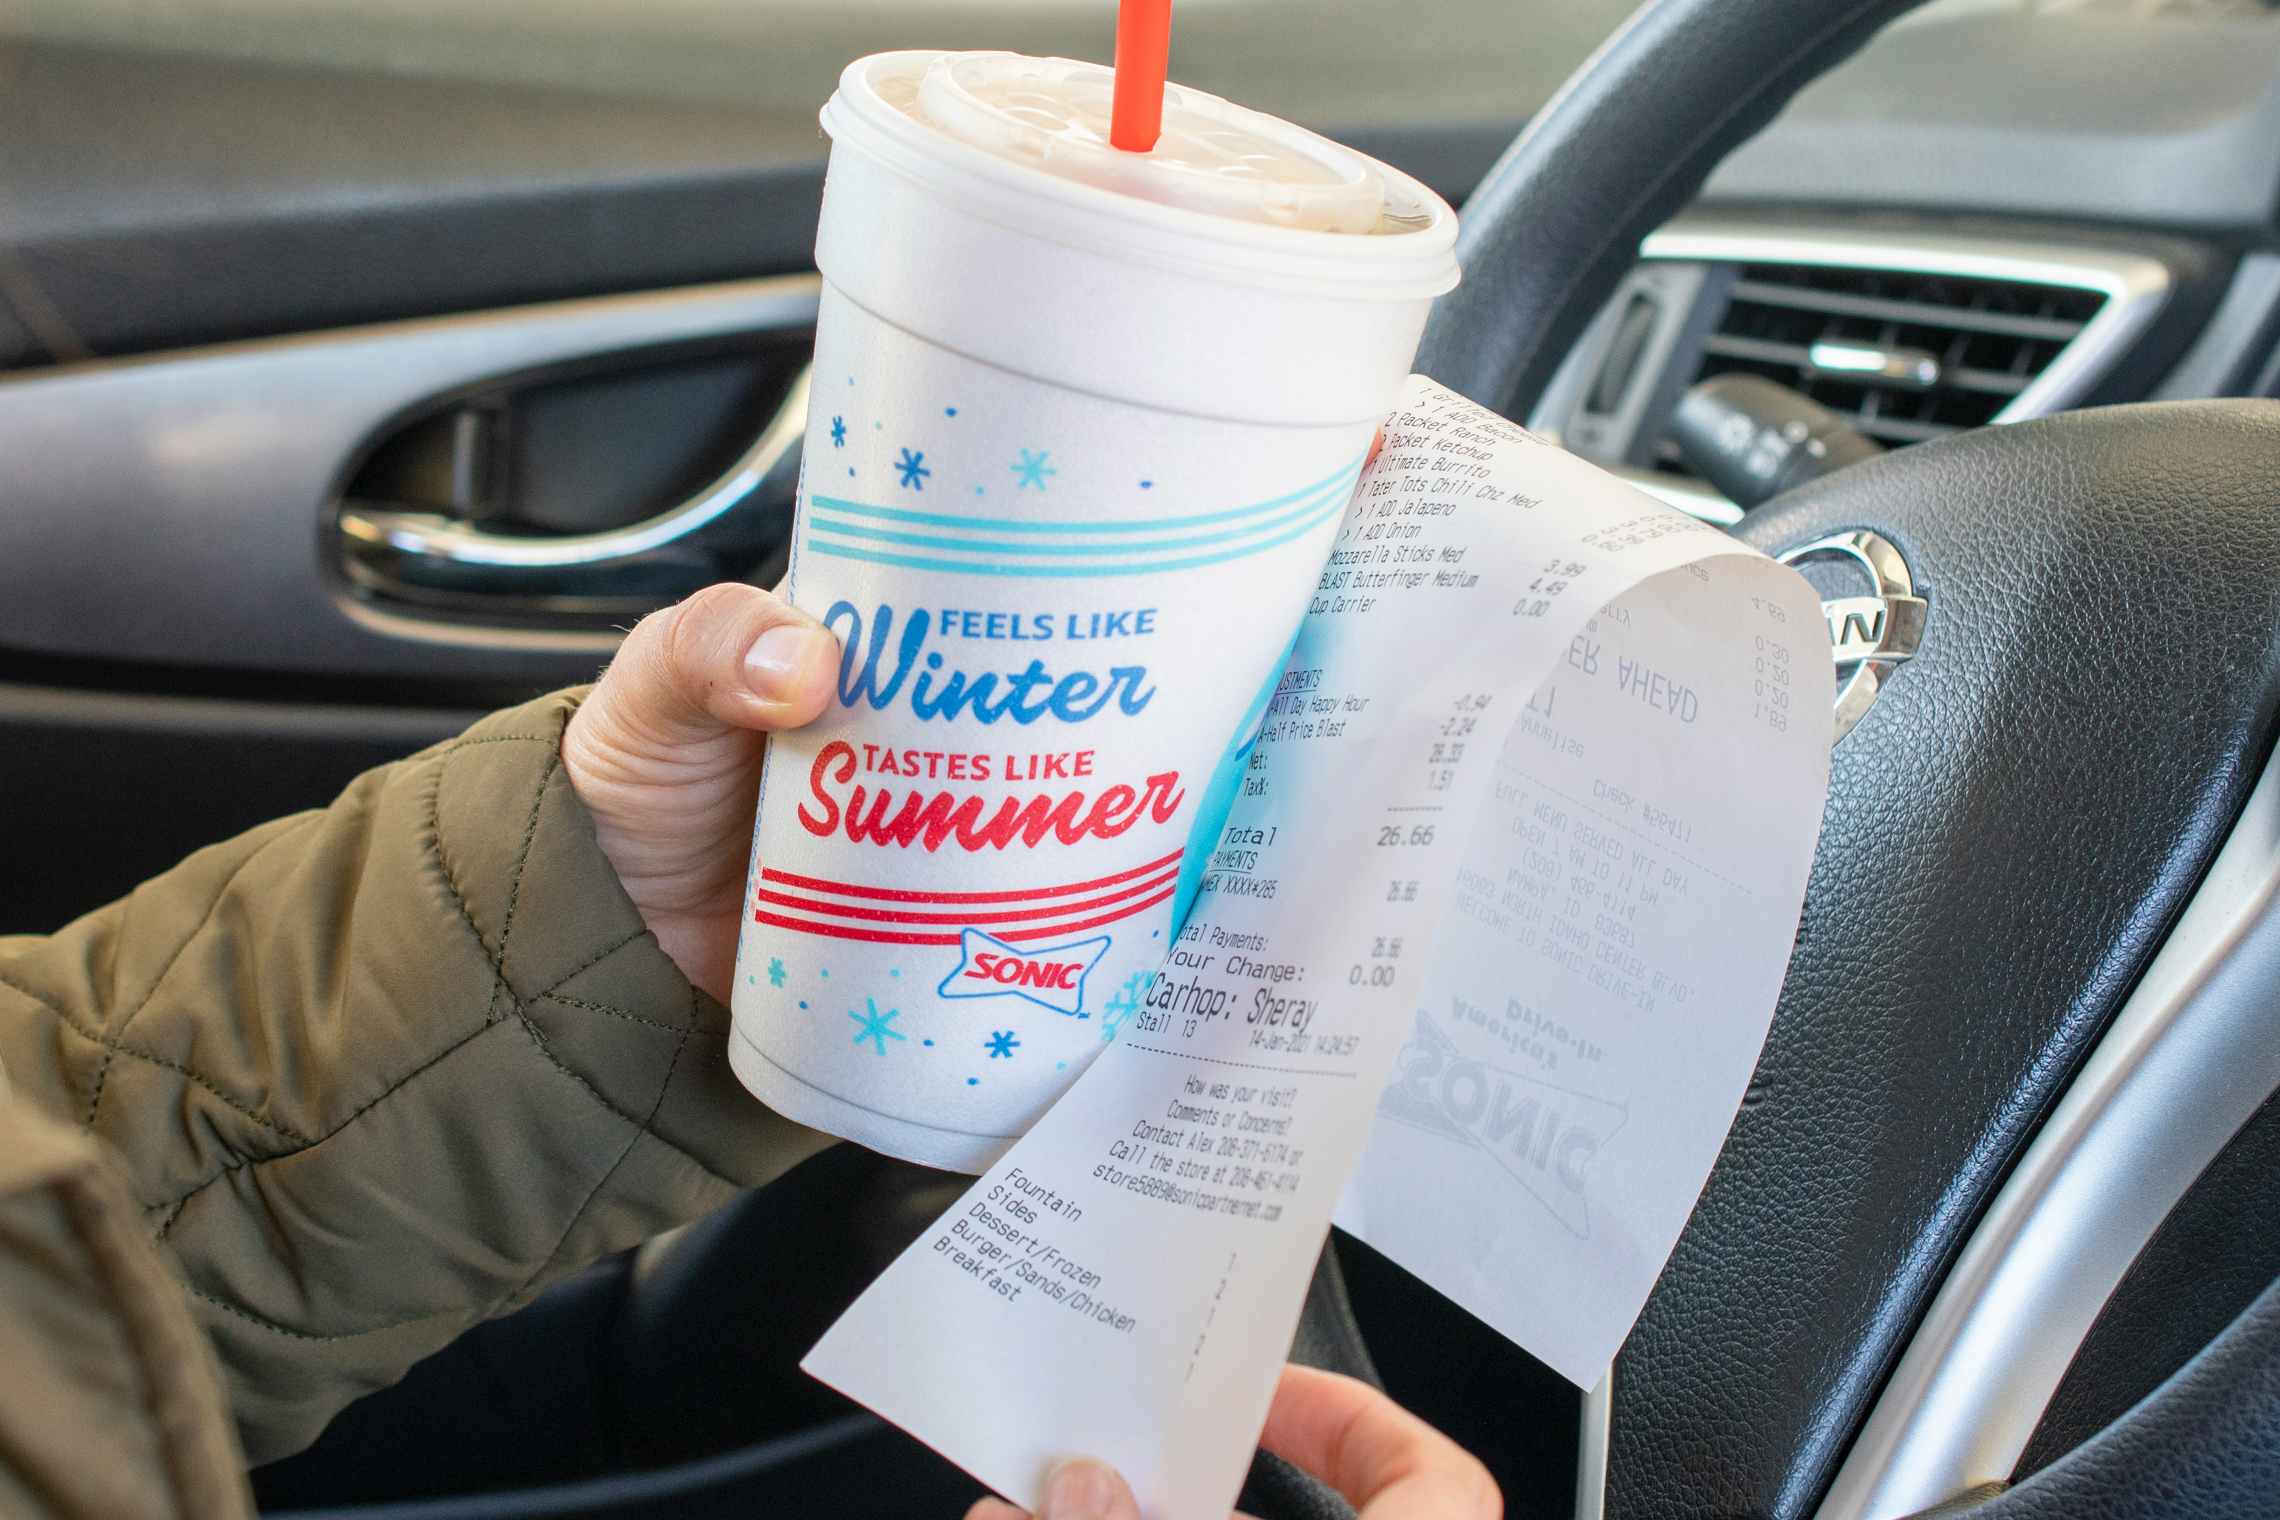 A person holding a Sonic receipt next to a Sonic beverage while sitting in a car.